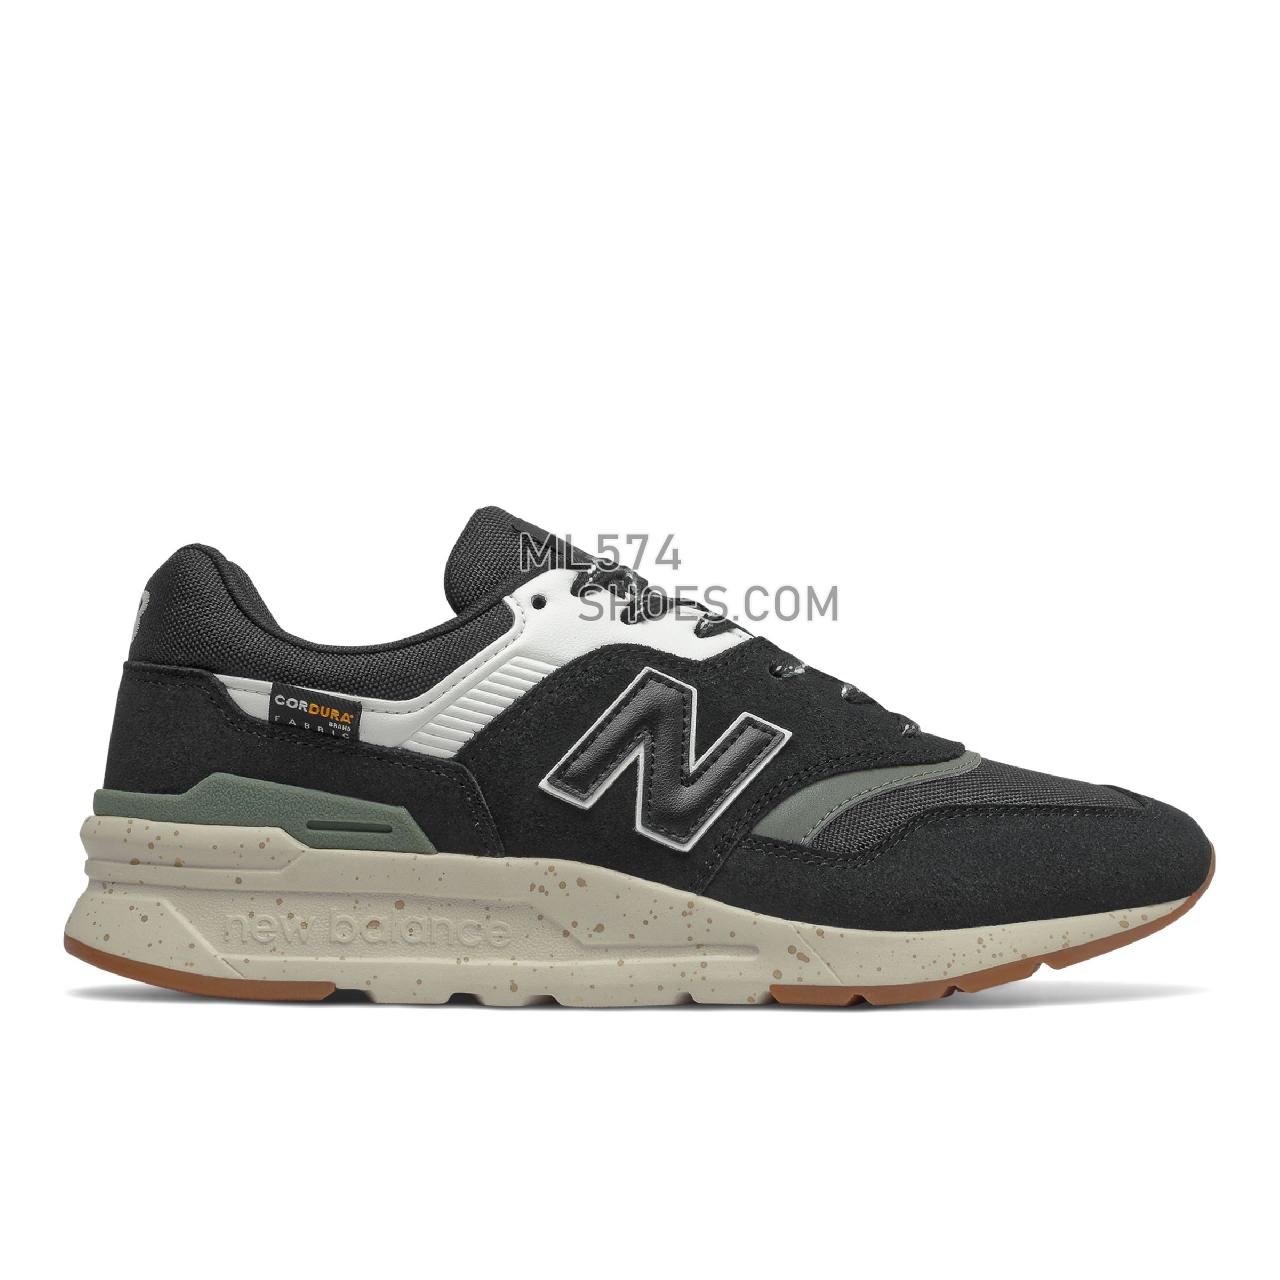 New Balance 997H - Men's Classic Sneakers - Black with Norway Spruce - CM997HPP